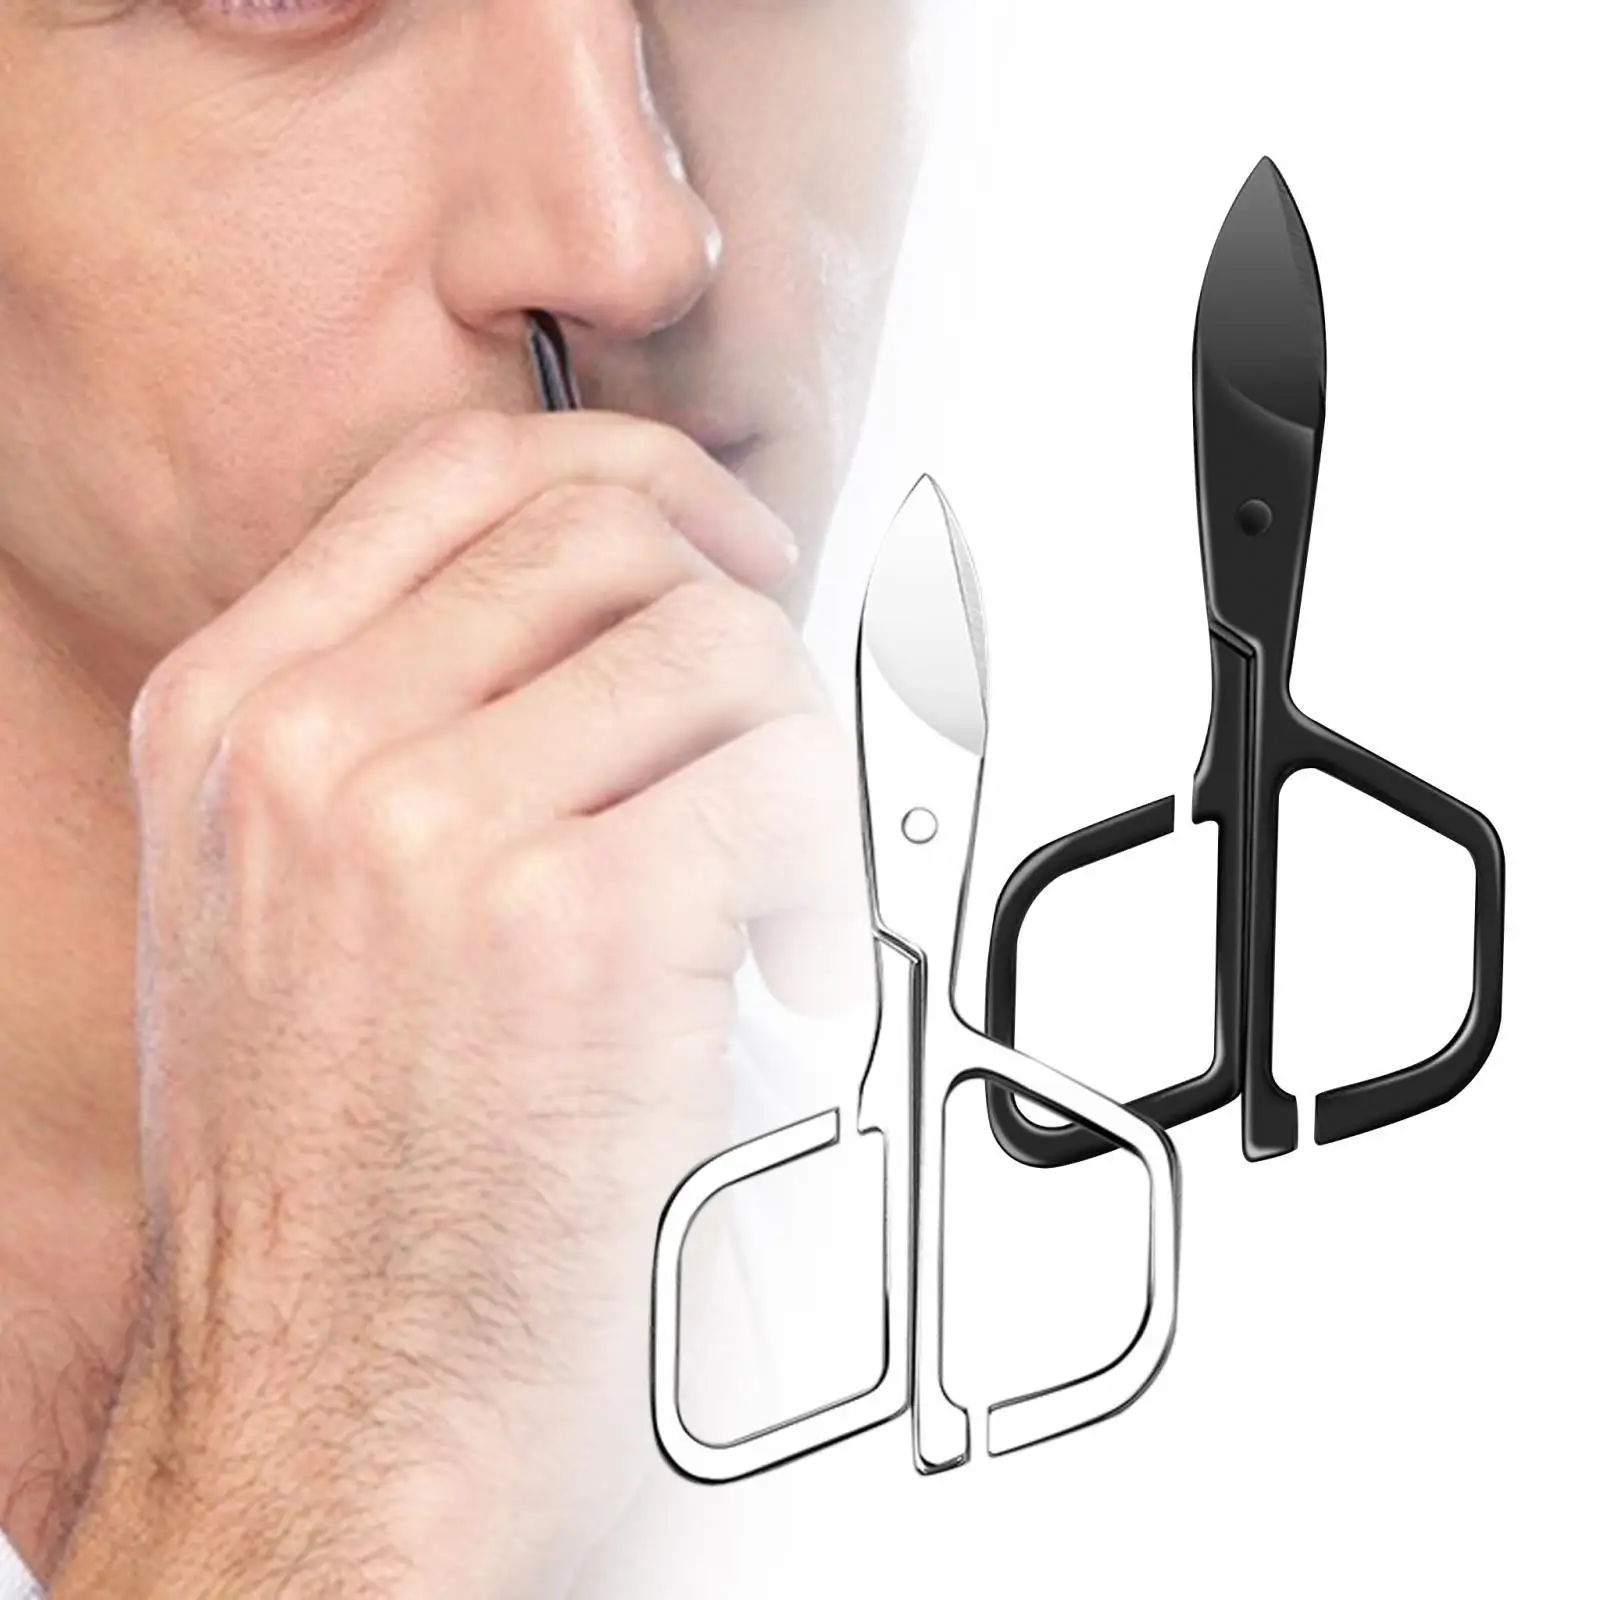 Nose Hair Scissors Waterproof Hair Cutting Simple Facial Hair Small Grooming Scissors for Ear Trimming Mustache Eyebrow Trimming